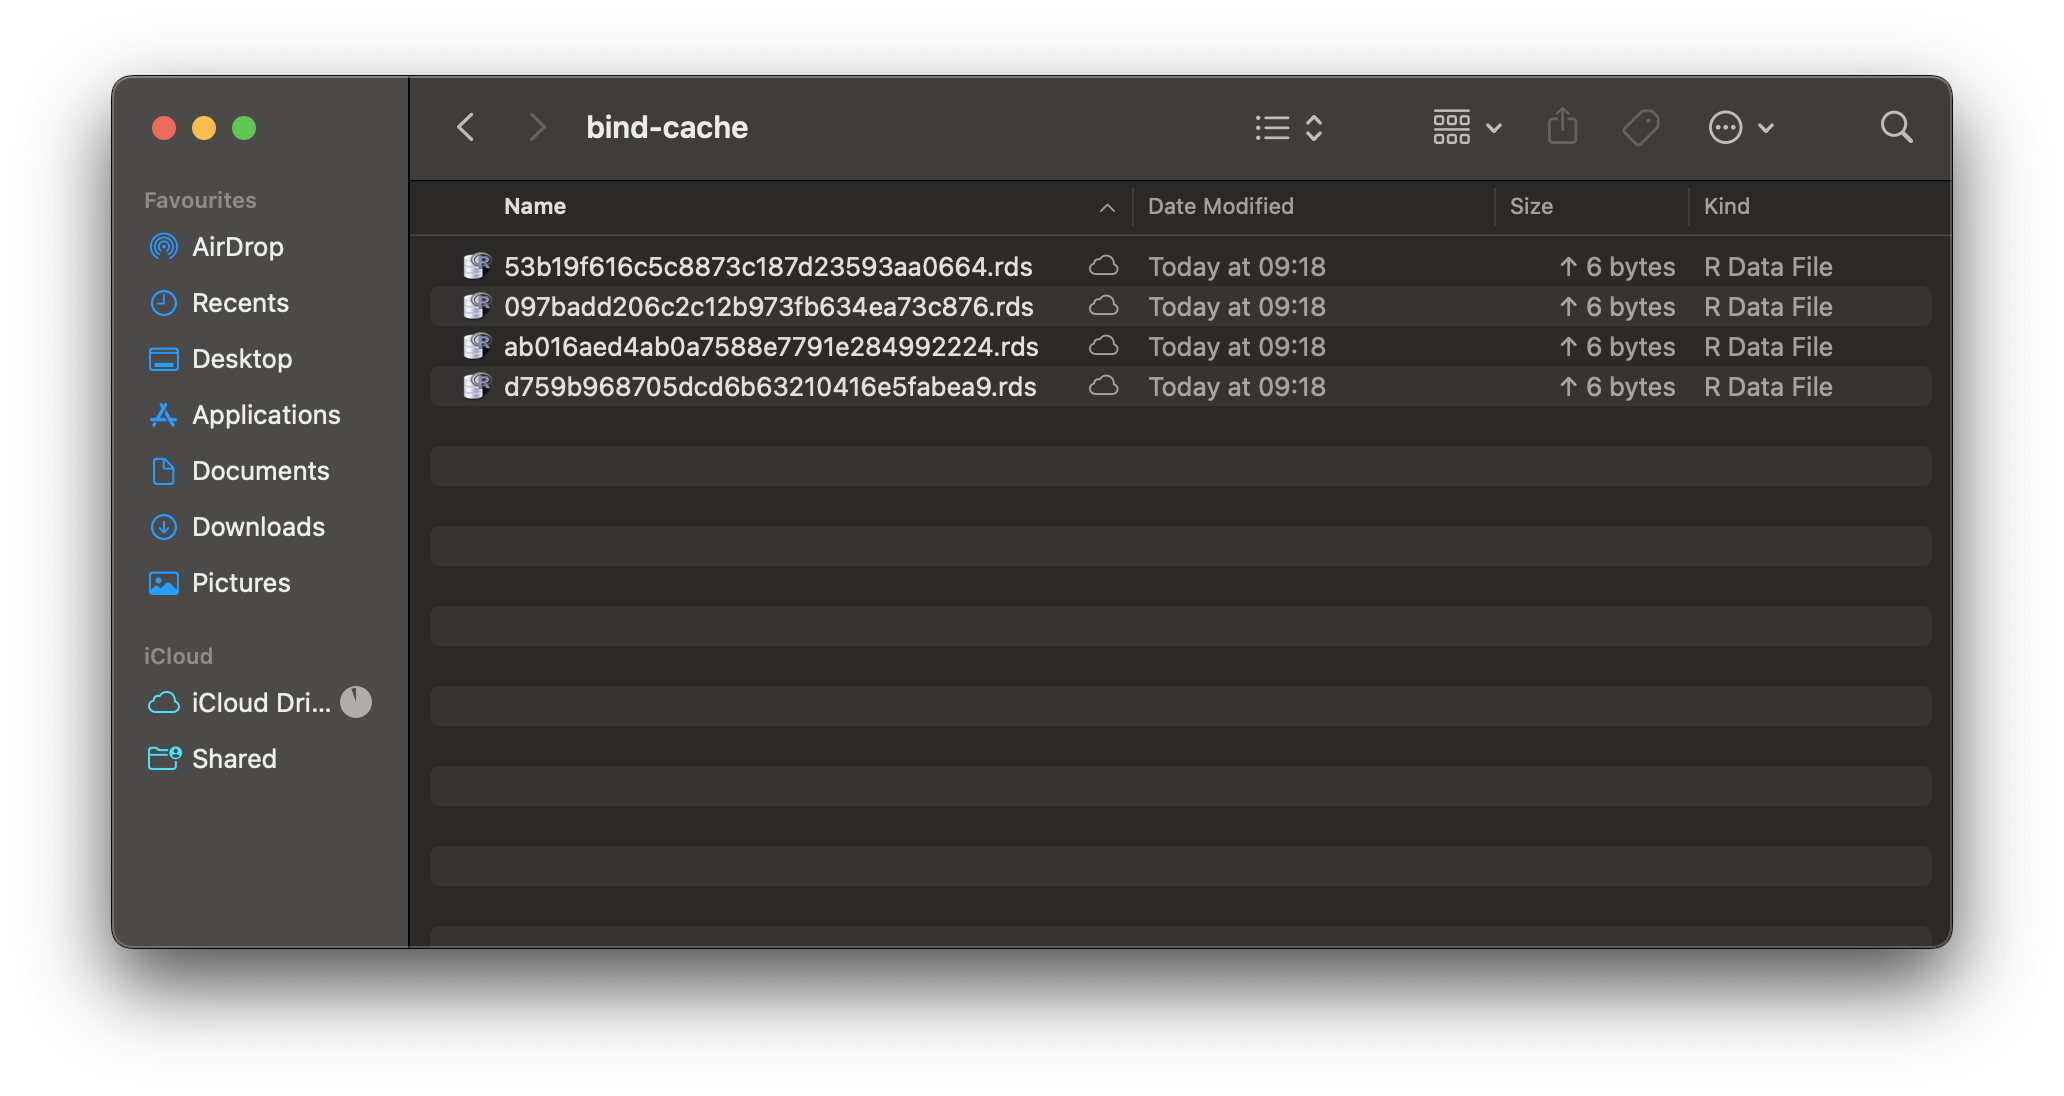 Image 4 - Contents of the bind-cache directory